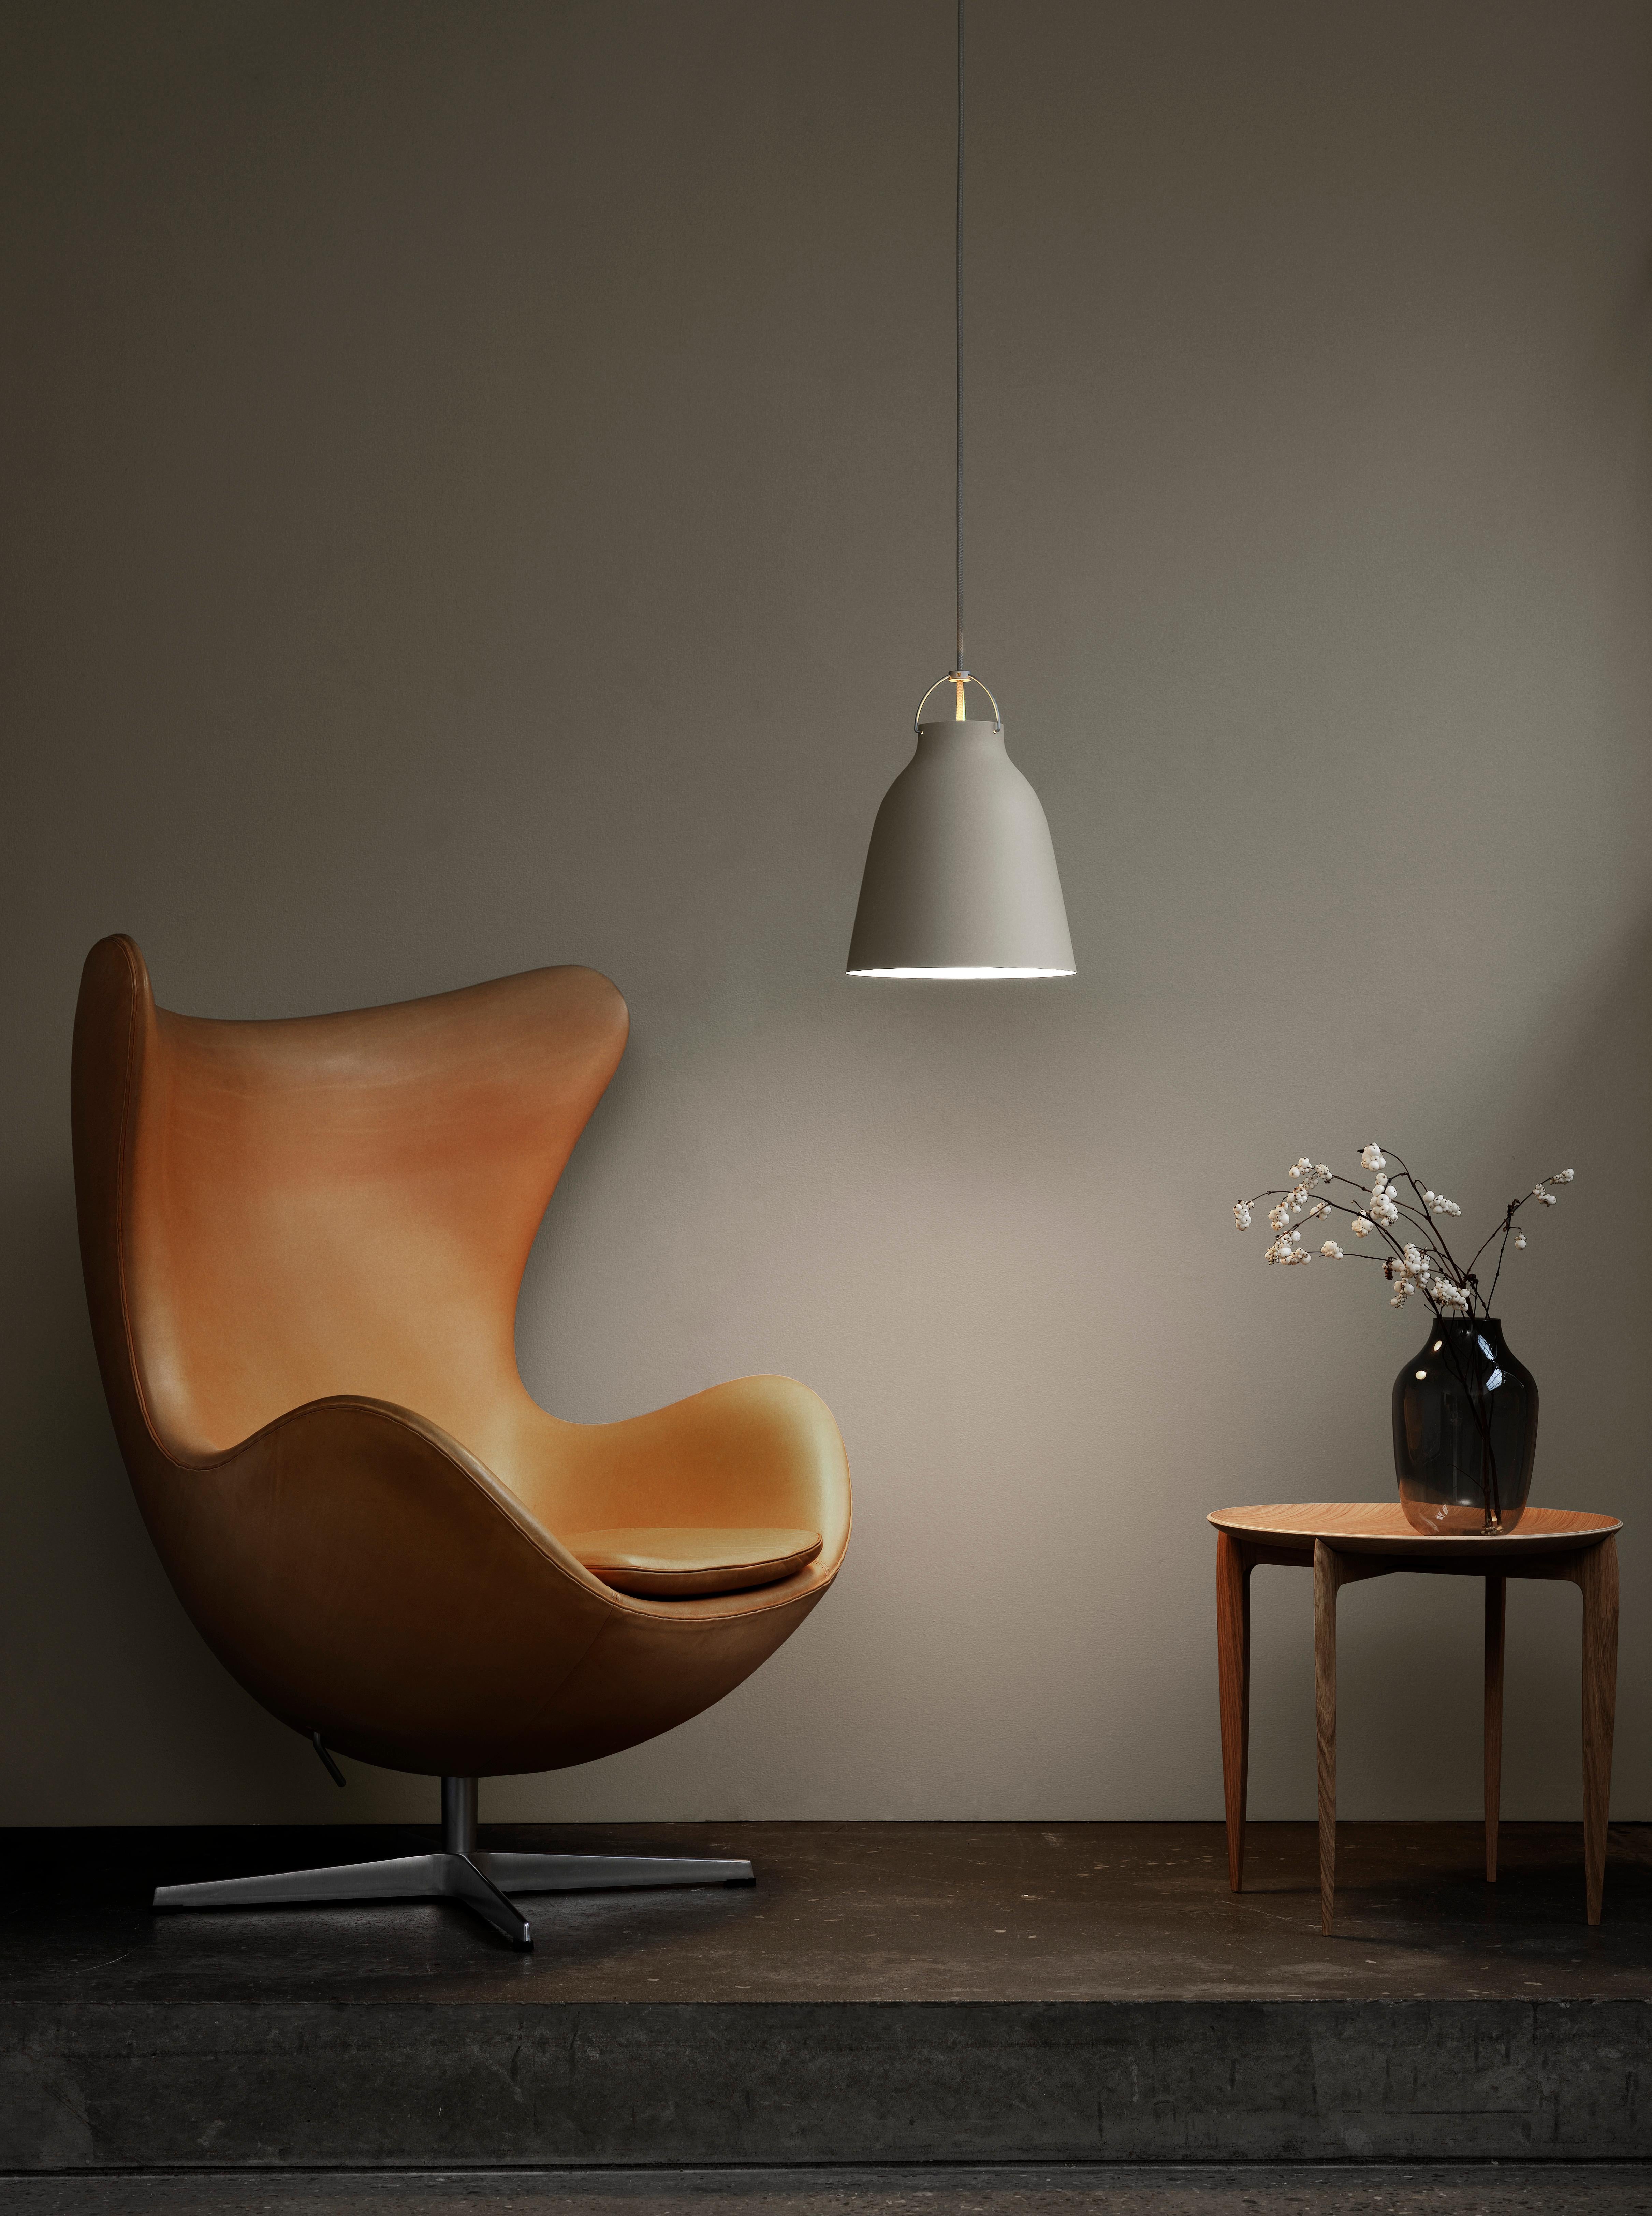 The Egg™ chair by Arne Jacobsen is a masterpiece of Danish design. 
Jacobsen found the perfect shape for the chair by experimenting with wire and plaster in his garage. 

Today, the egg chair is recognized worldwide as one of the triumphs of